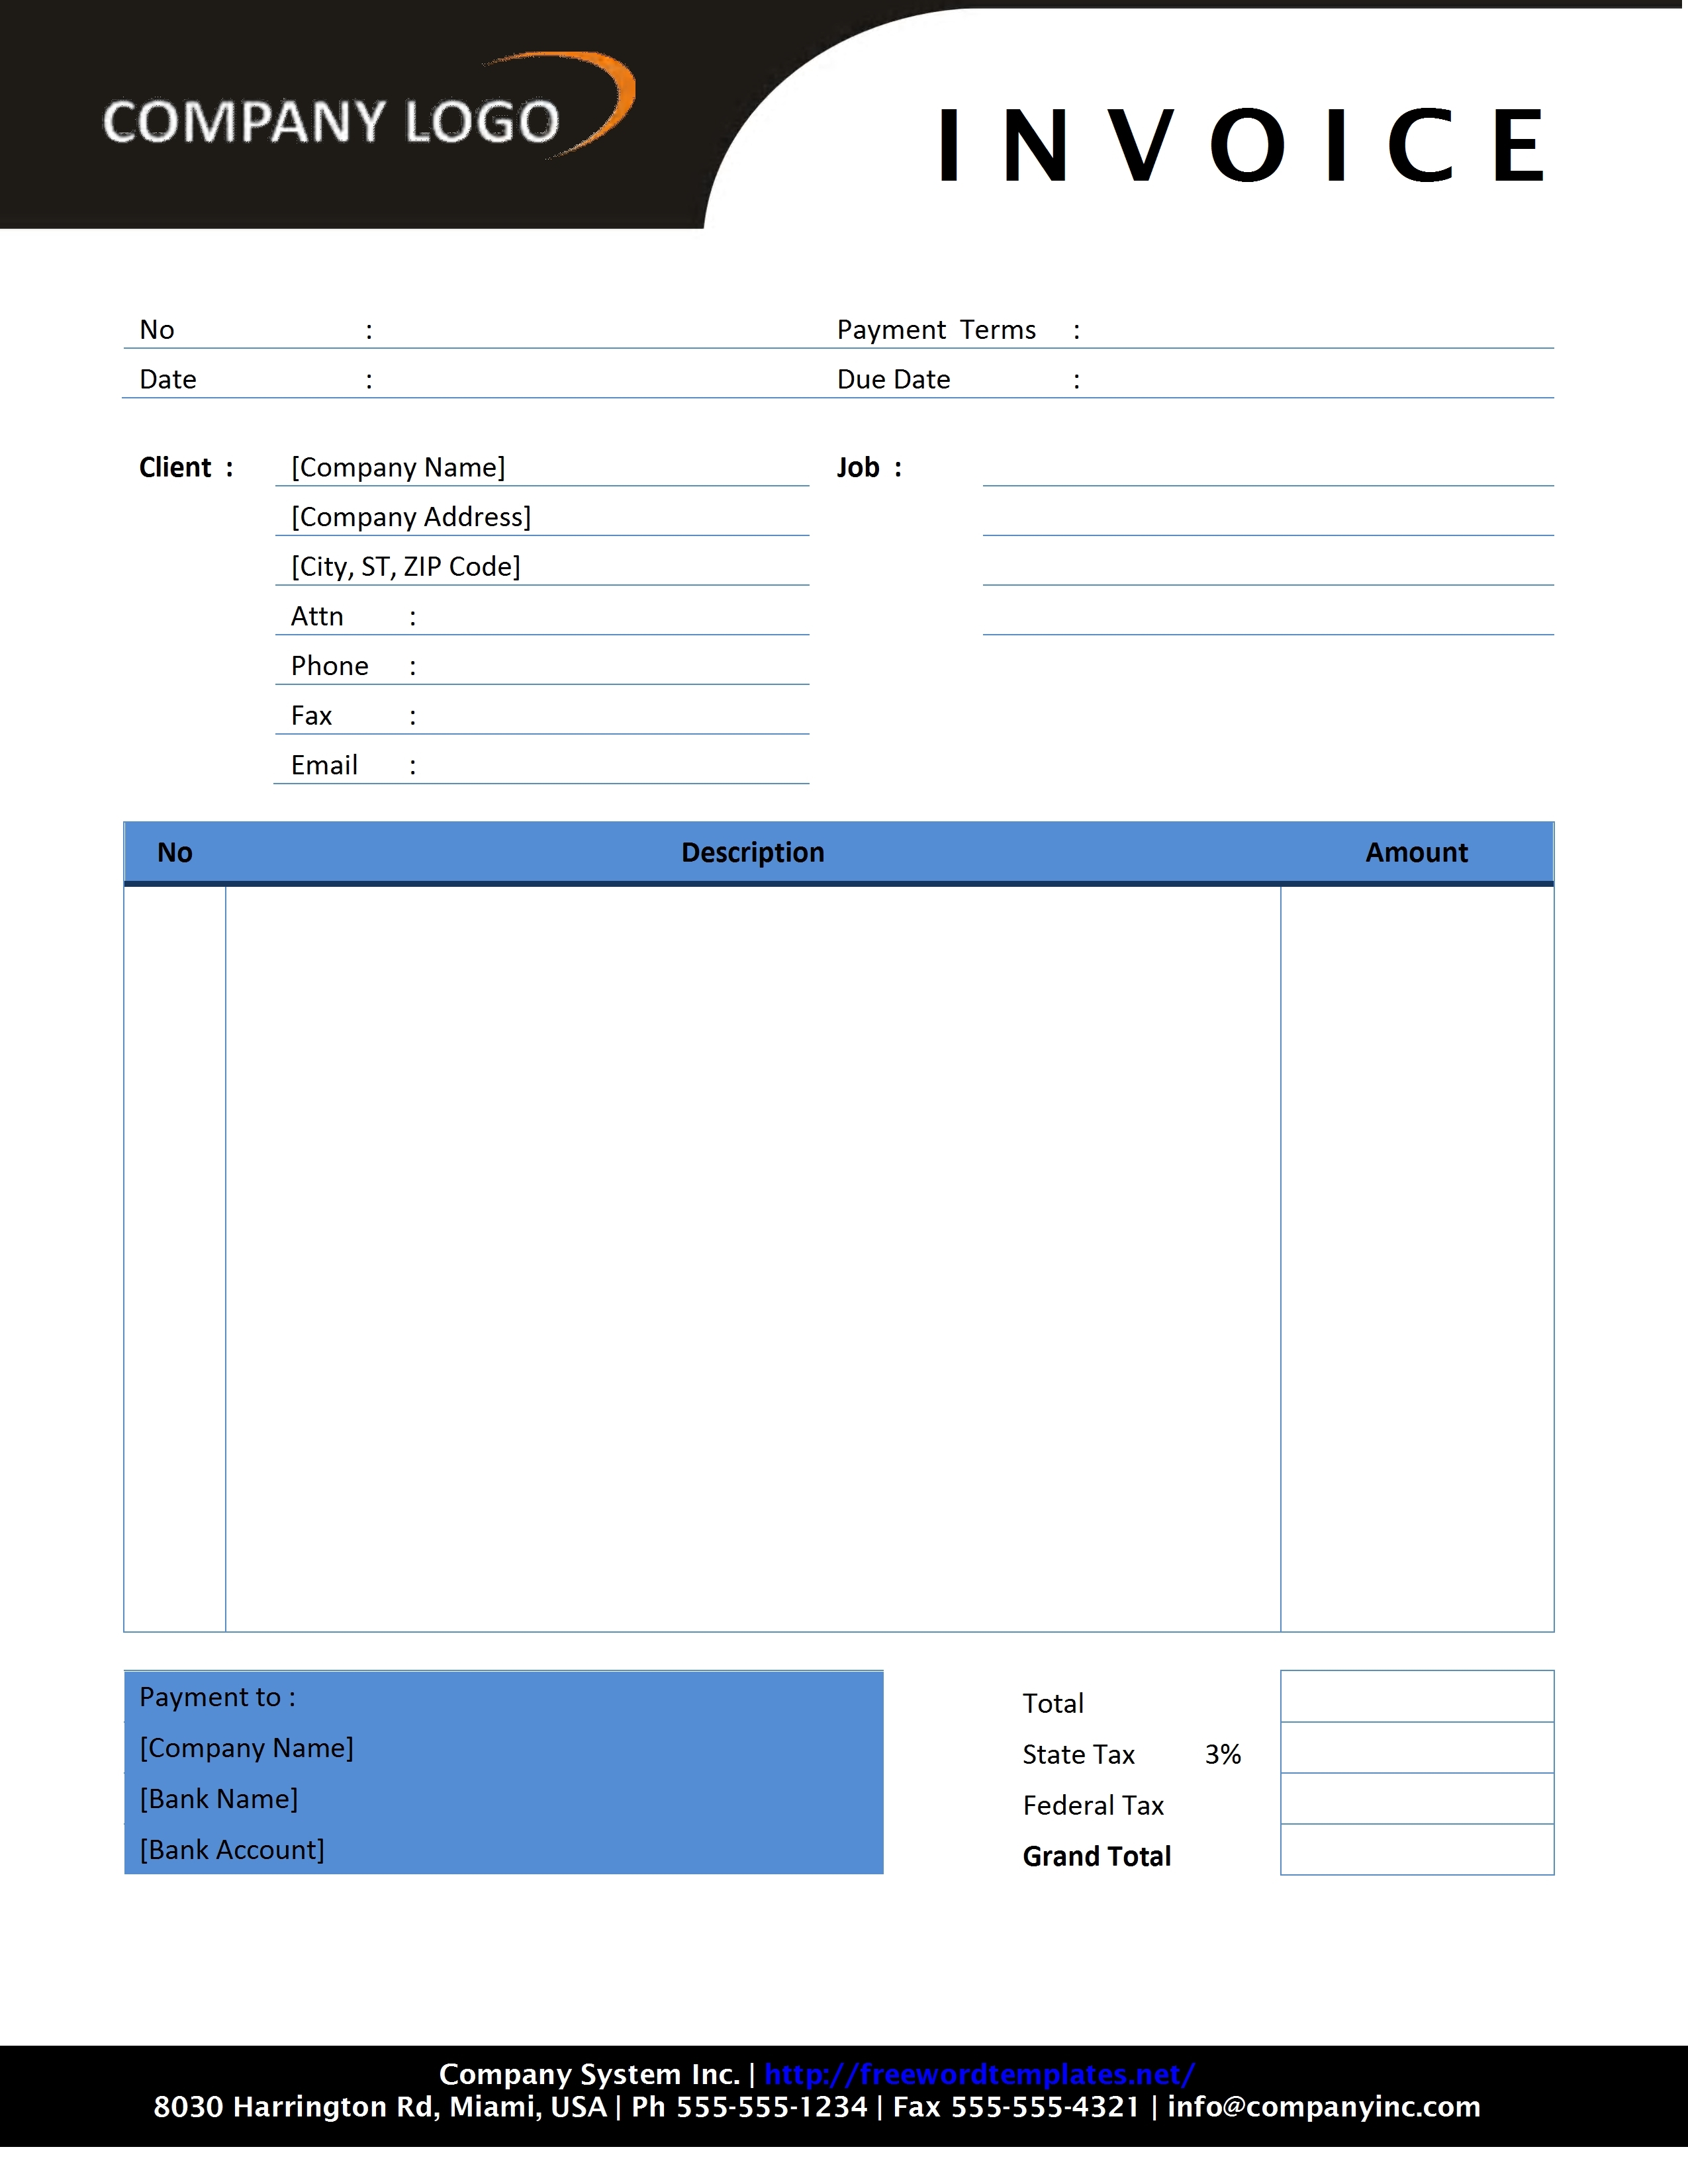 invoice format doc free blank invoice template pdf free invoice invoice format doc